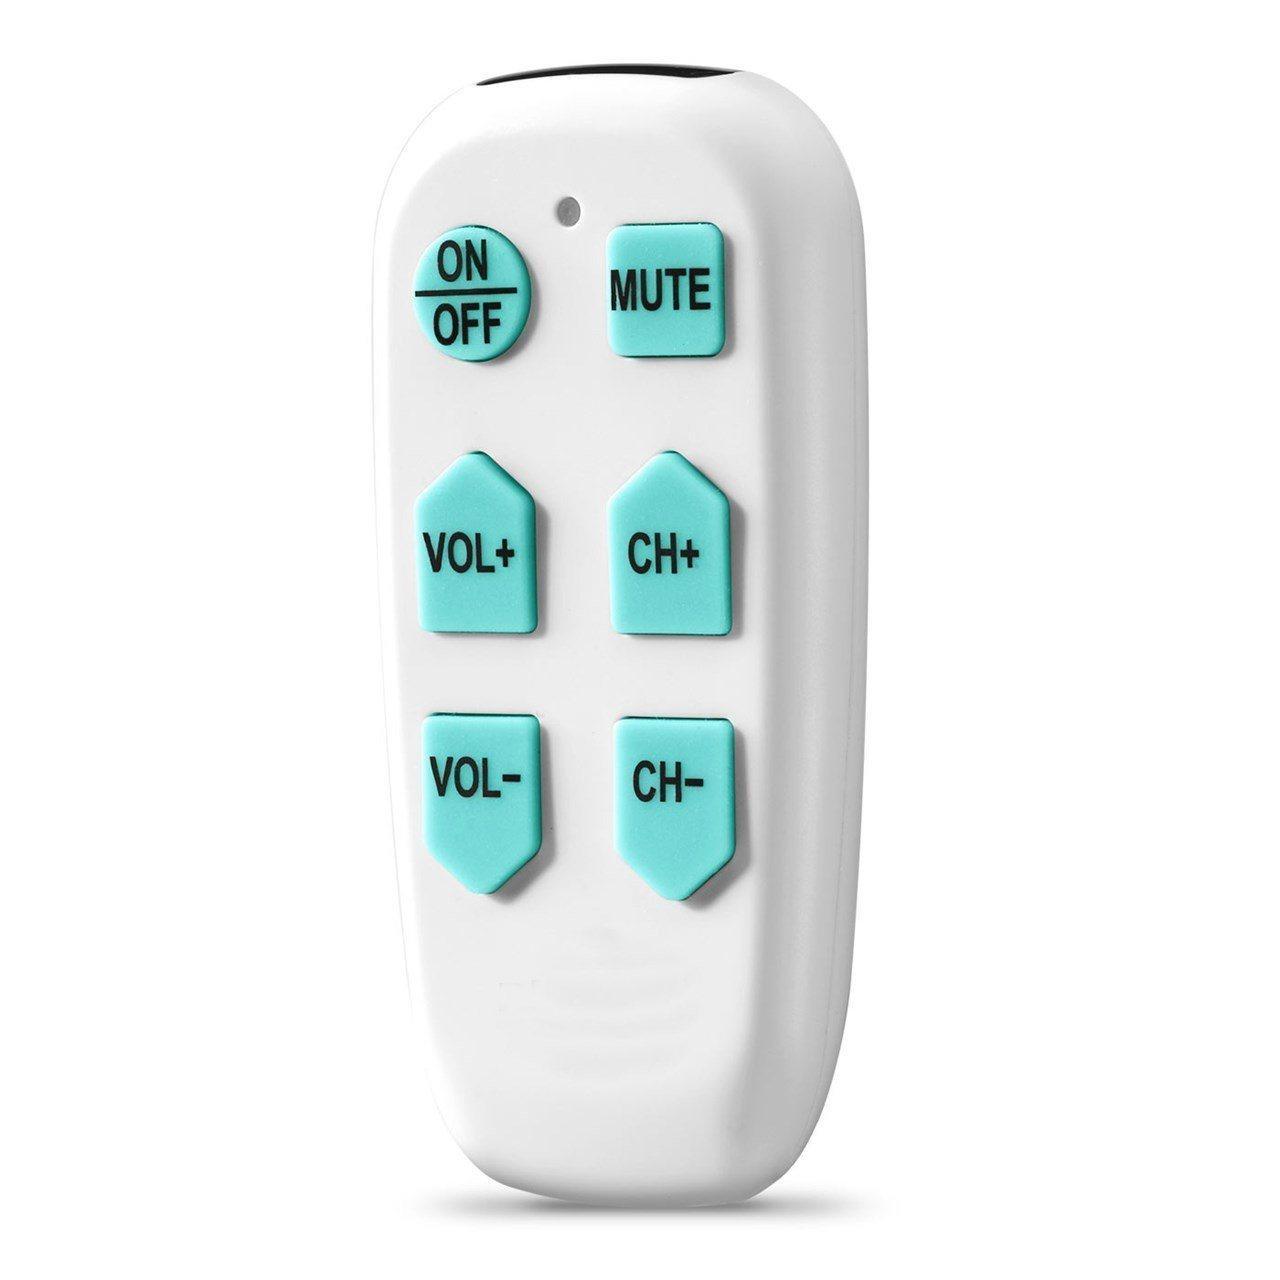 EZ TV Remote - The Low Vision Store